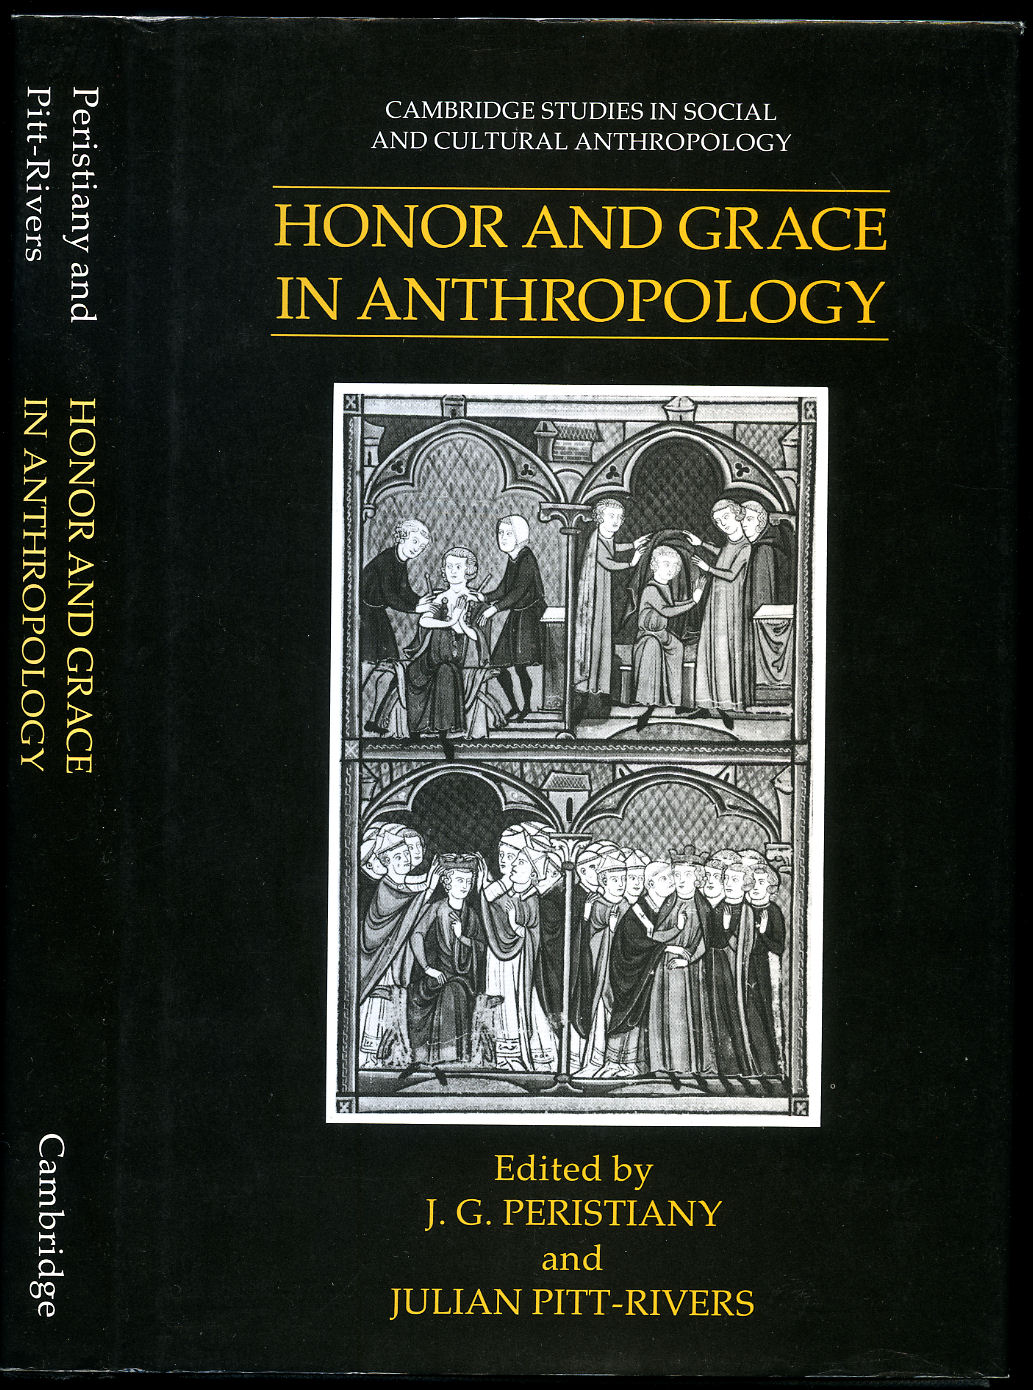 Honor (Honour) and Grace in Anthropology [Cambridge Studies in Social and Cultural Anthropology No. 76] - Peristiany, J. G. and Julian Pitt-Rivers [Edited by]